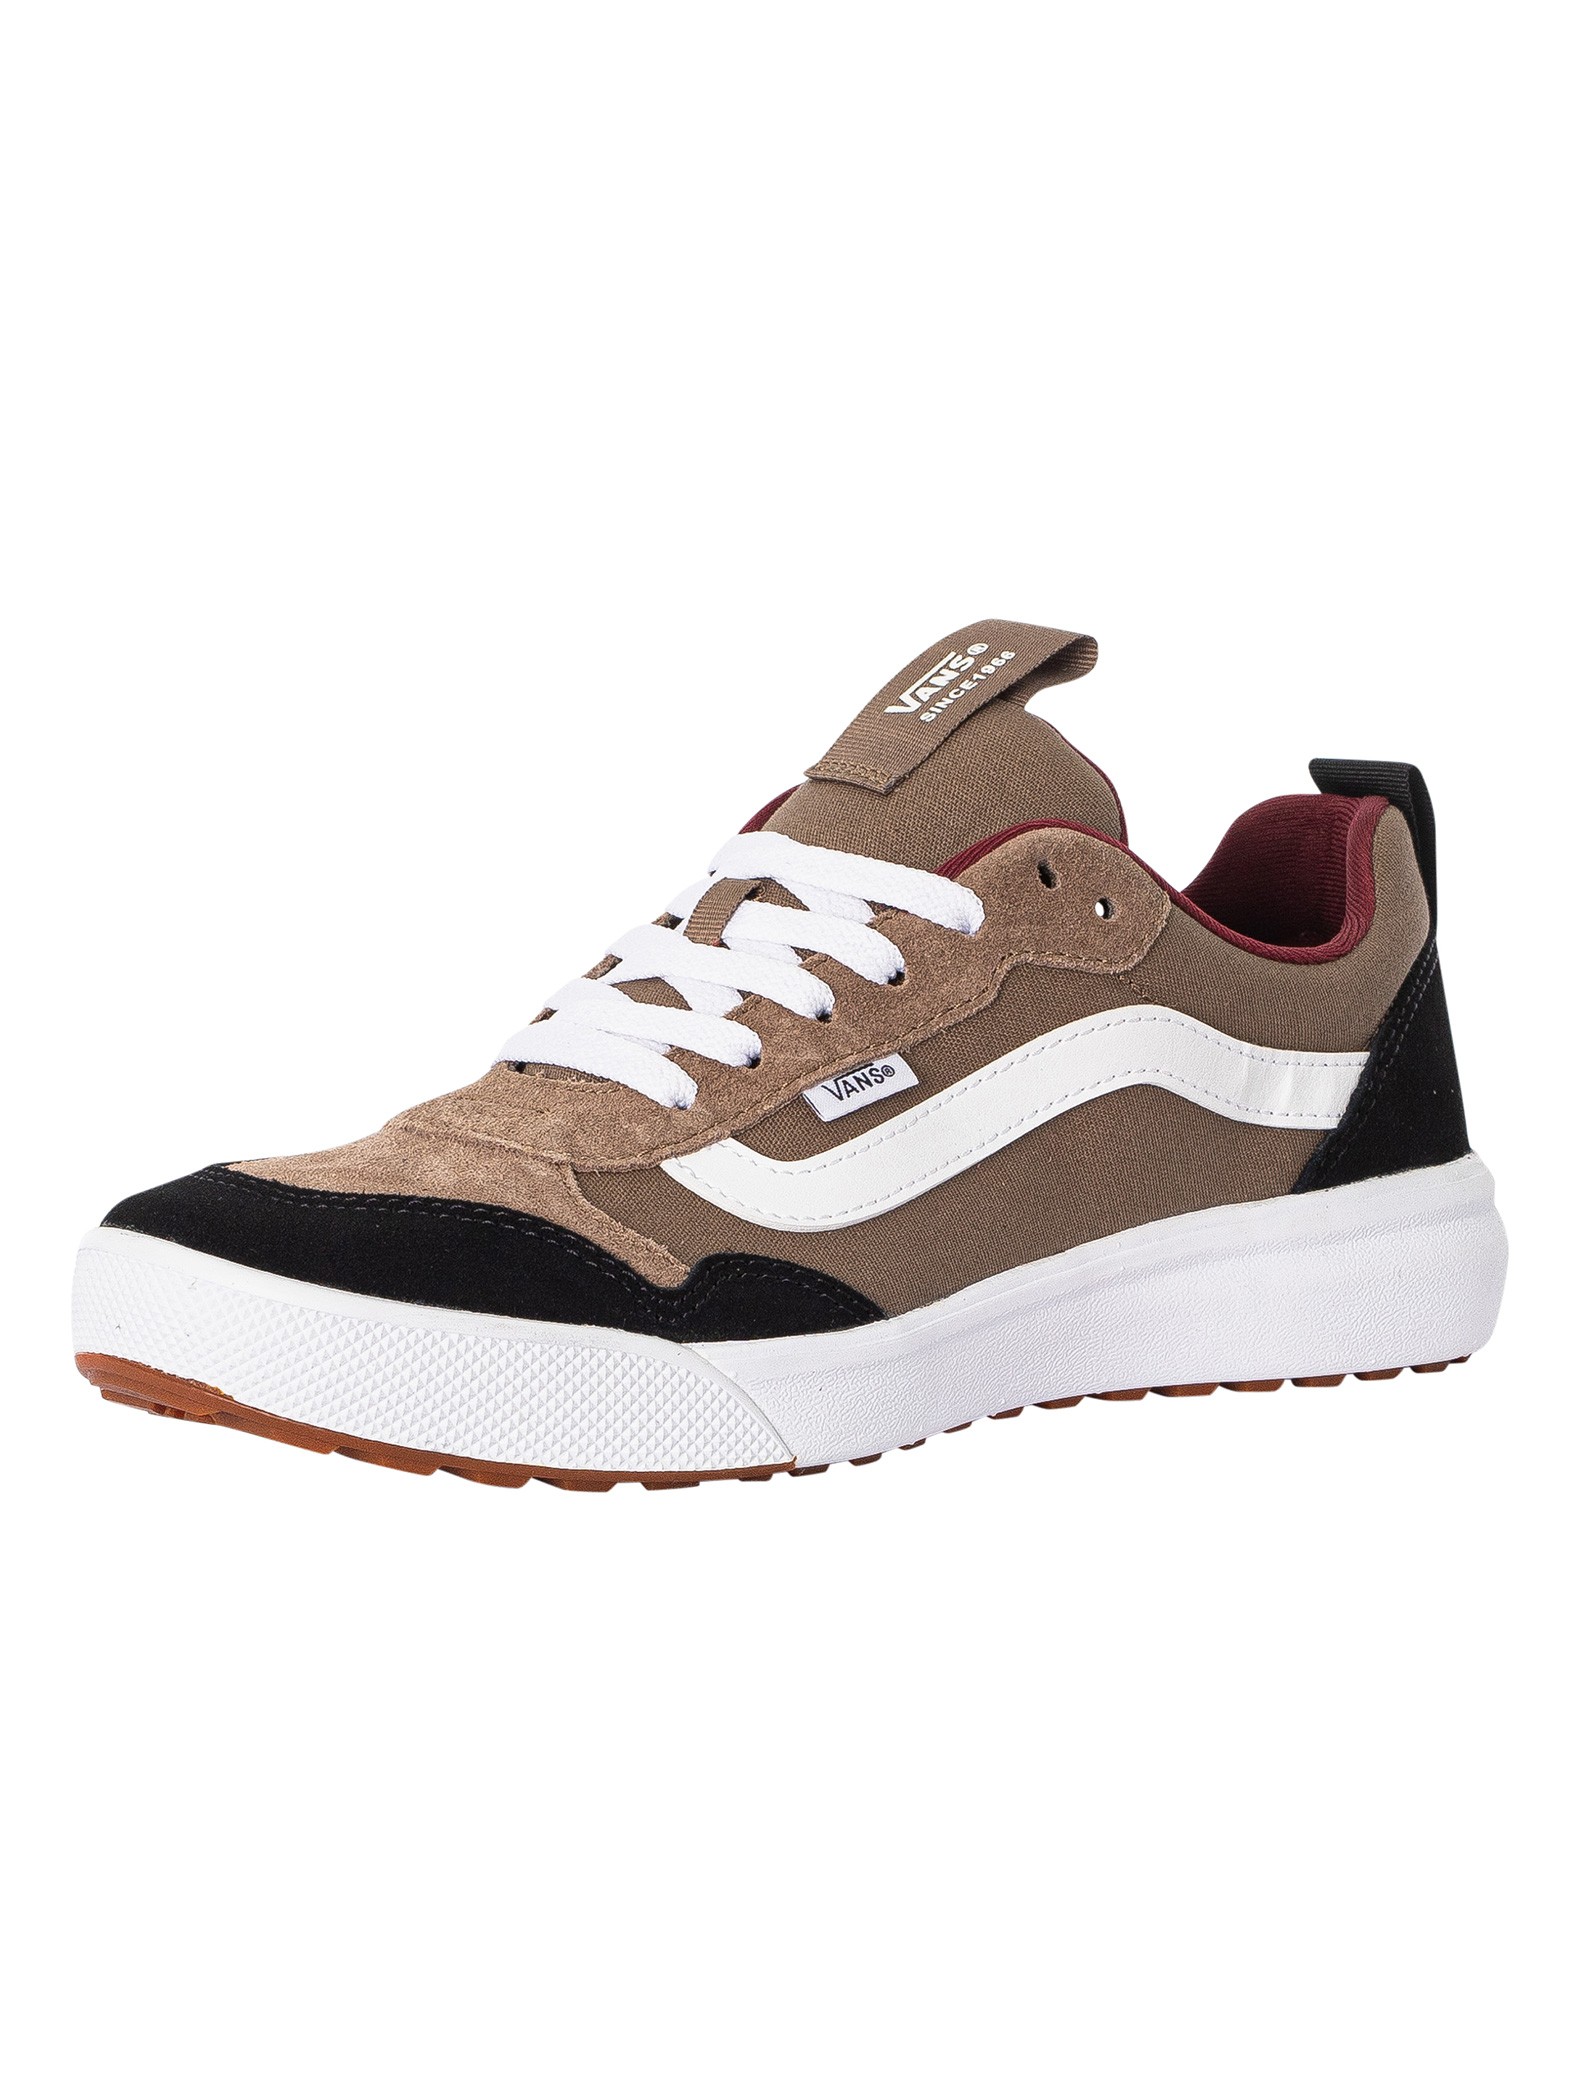 Range Exp Suede Canvas Trainers product